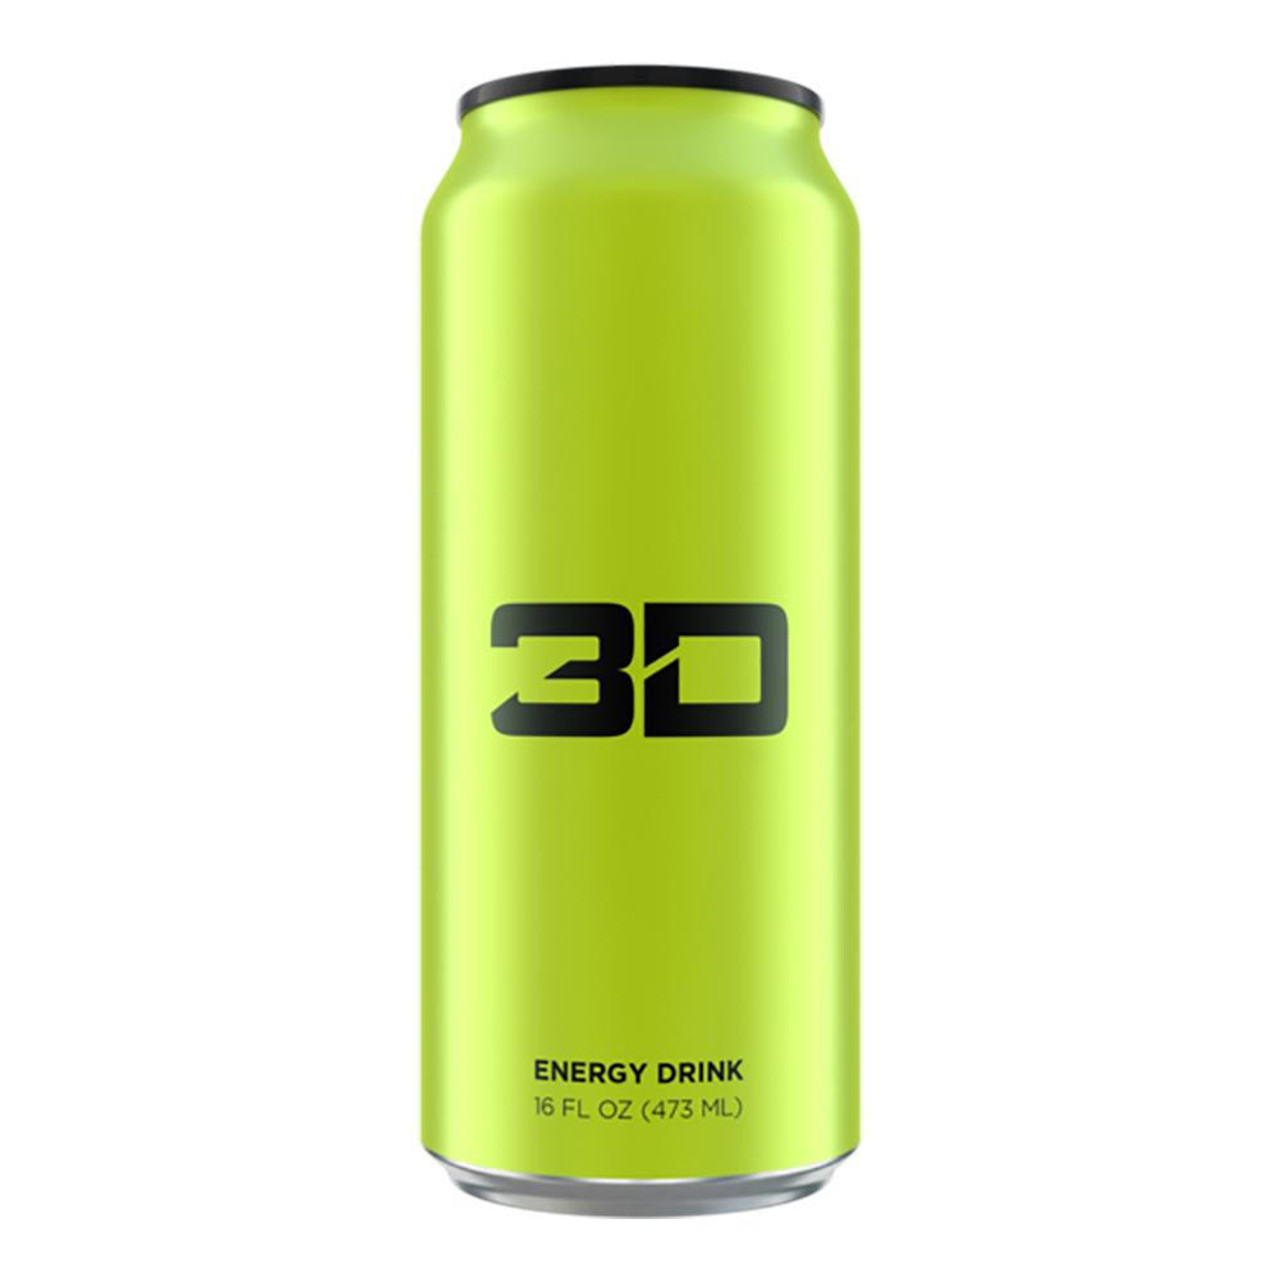 Is 3d Energy Drink Good For You: Weighing the Health Benefits of 3D Energy